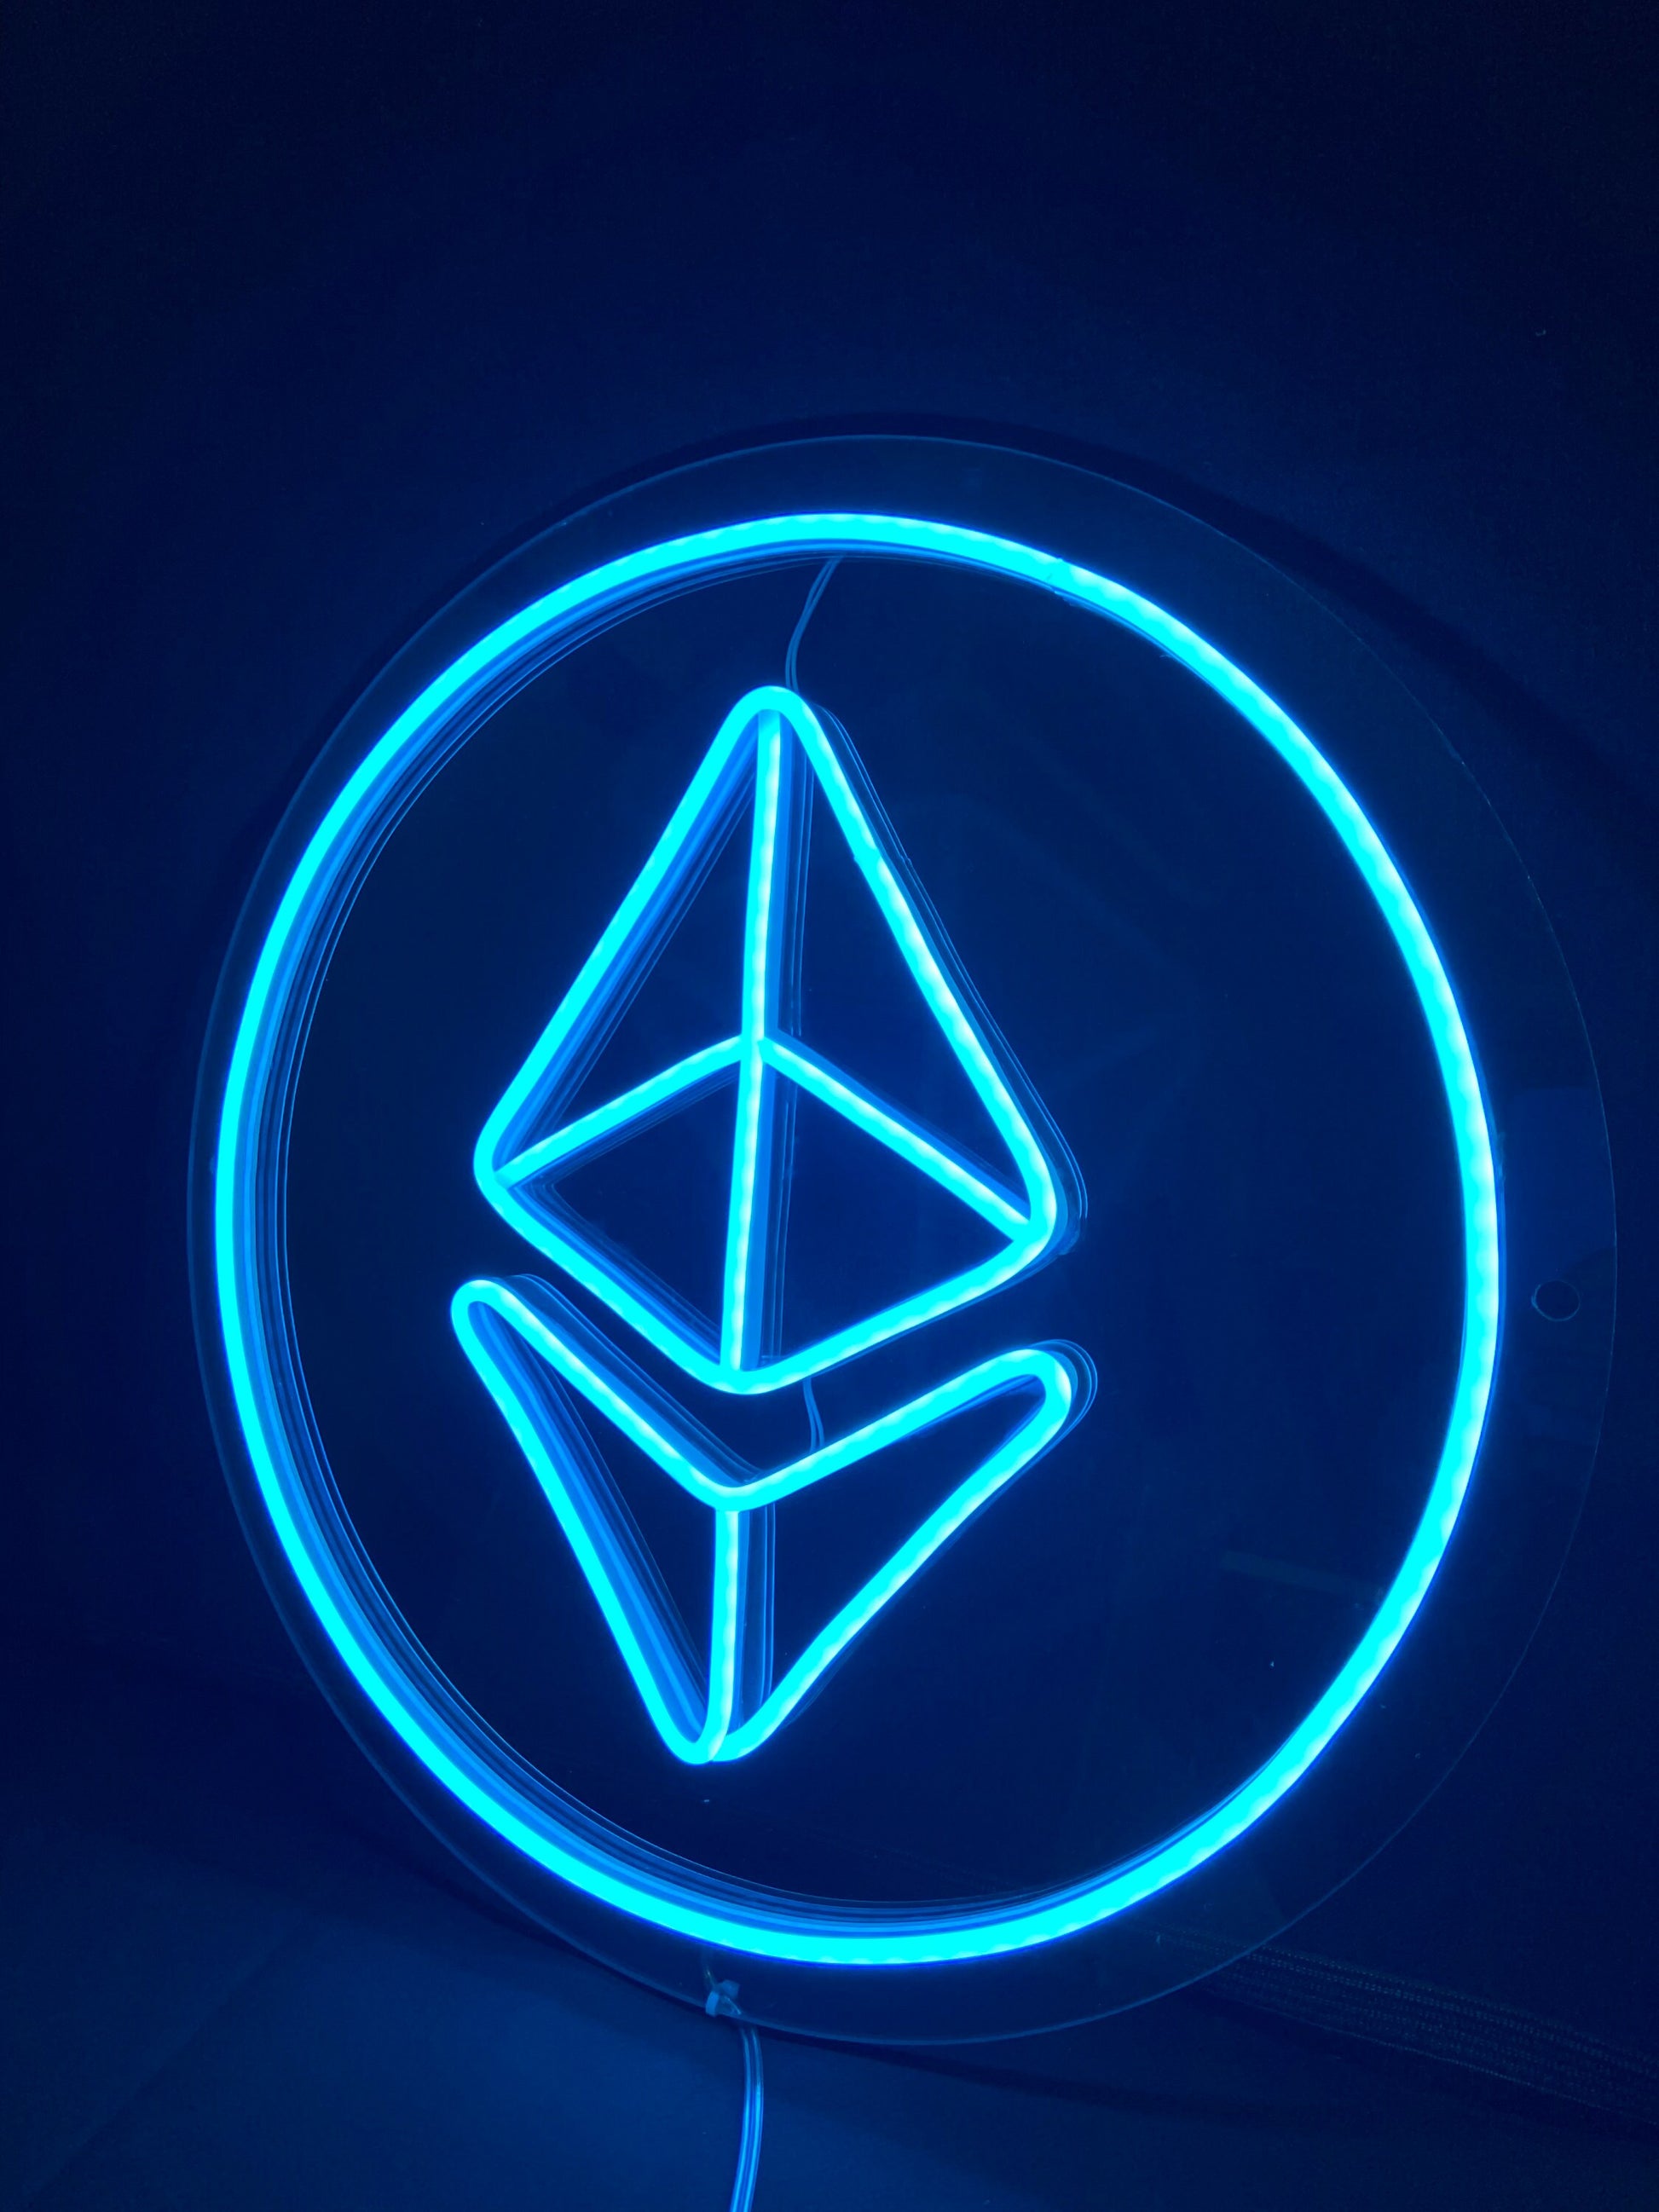 Ethereum - LED Neon Sign, Bedroom neon sign, Crypto neon sign, Neon Lights, Crypto